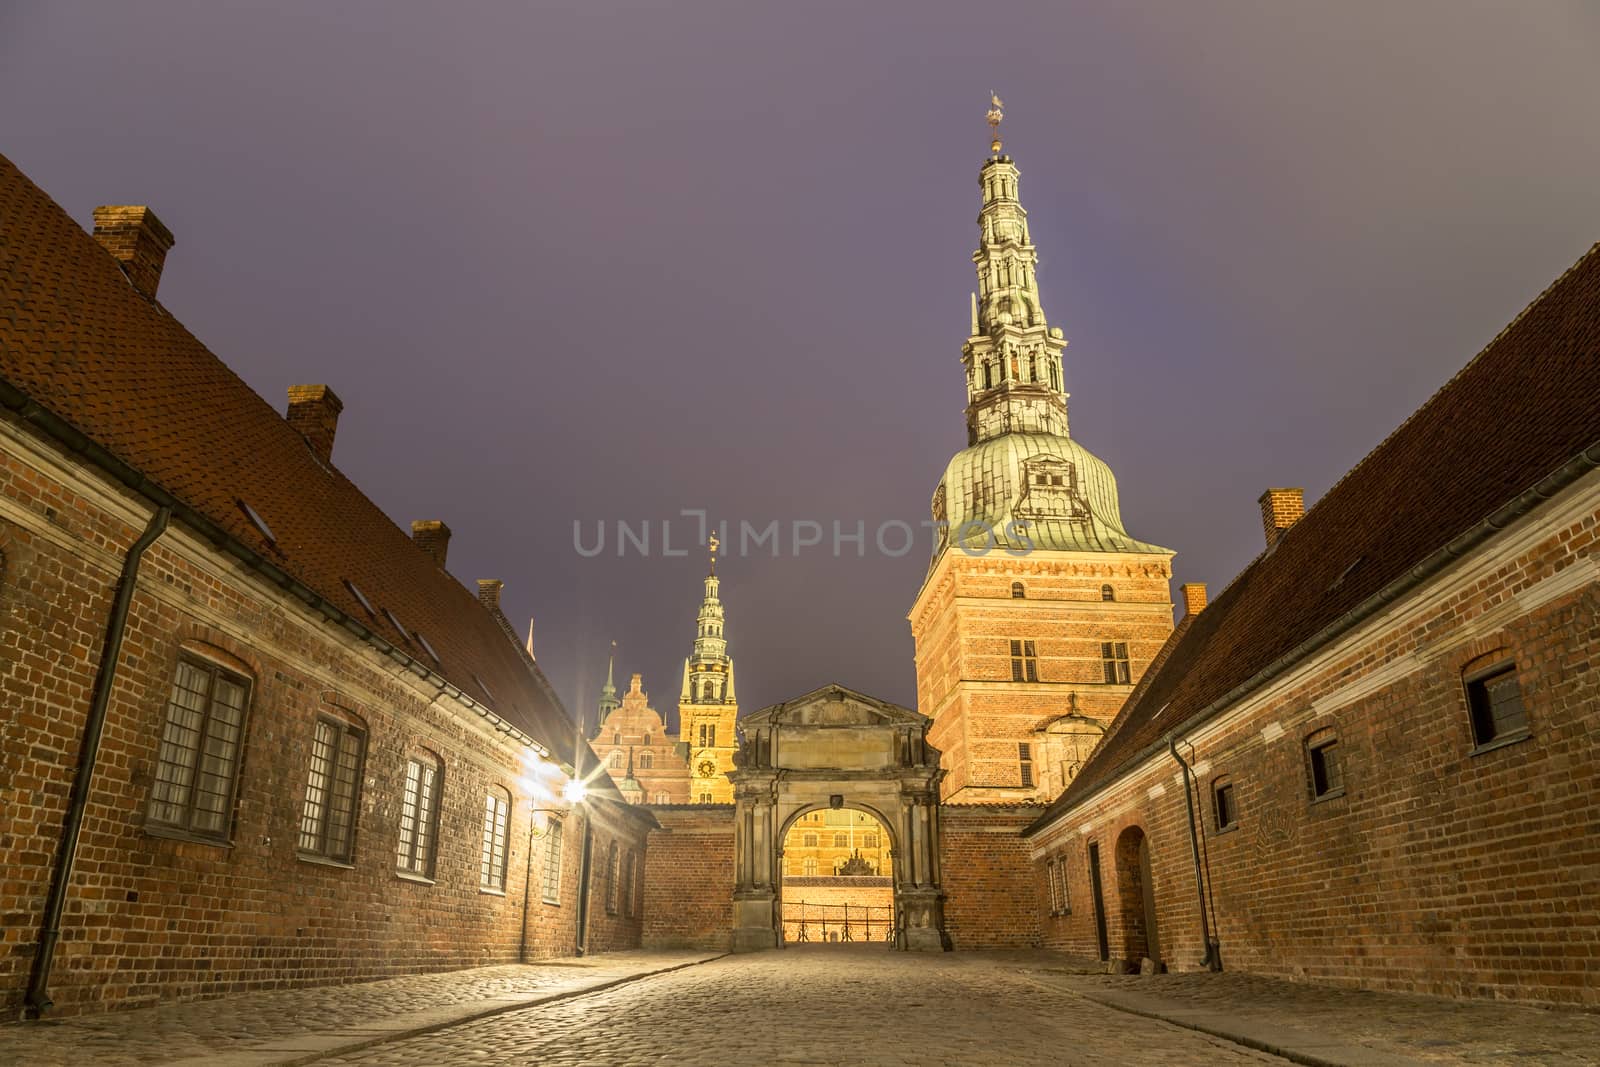 Hillerod, Denmark - December 29, 2016: View of the illuminated entrance gate to Frederiksborg Palace